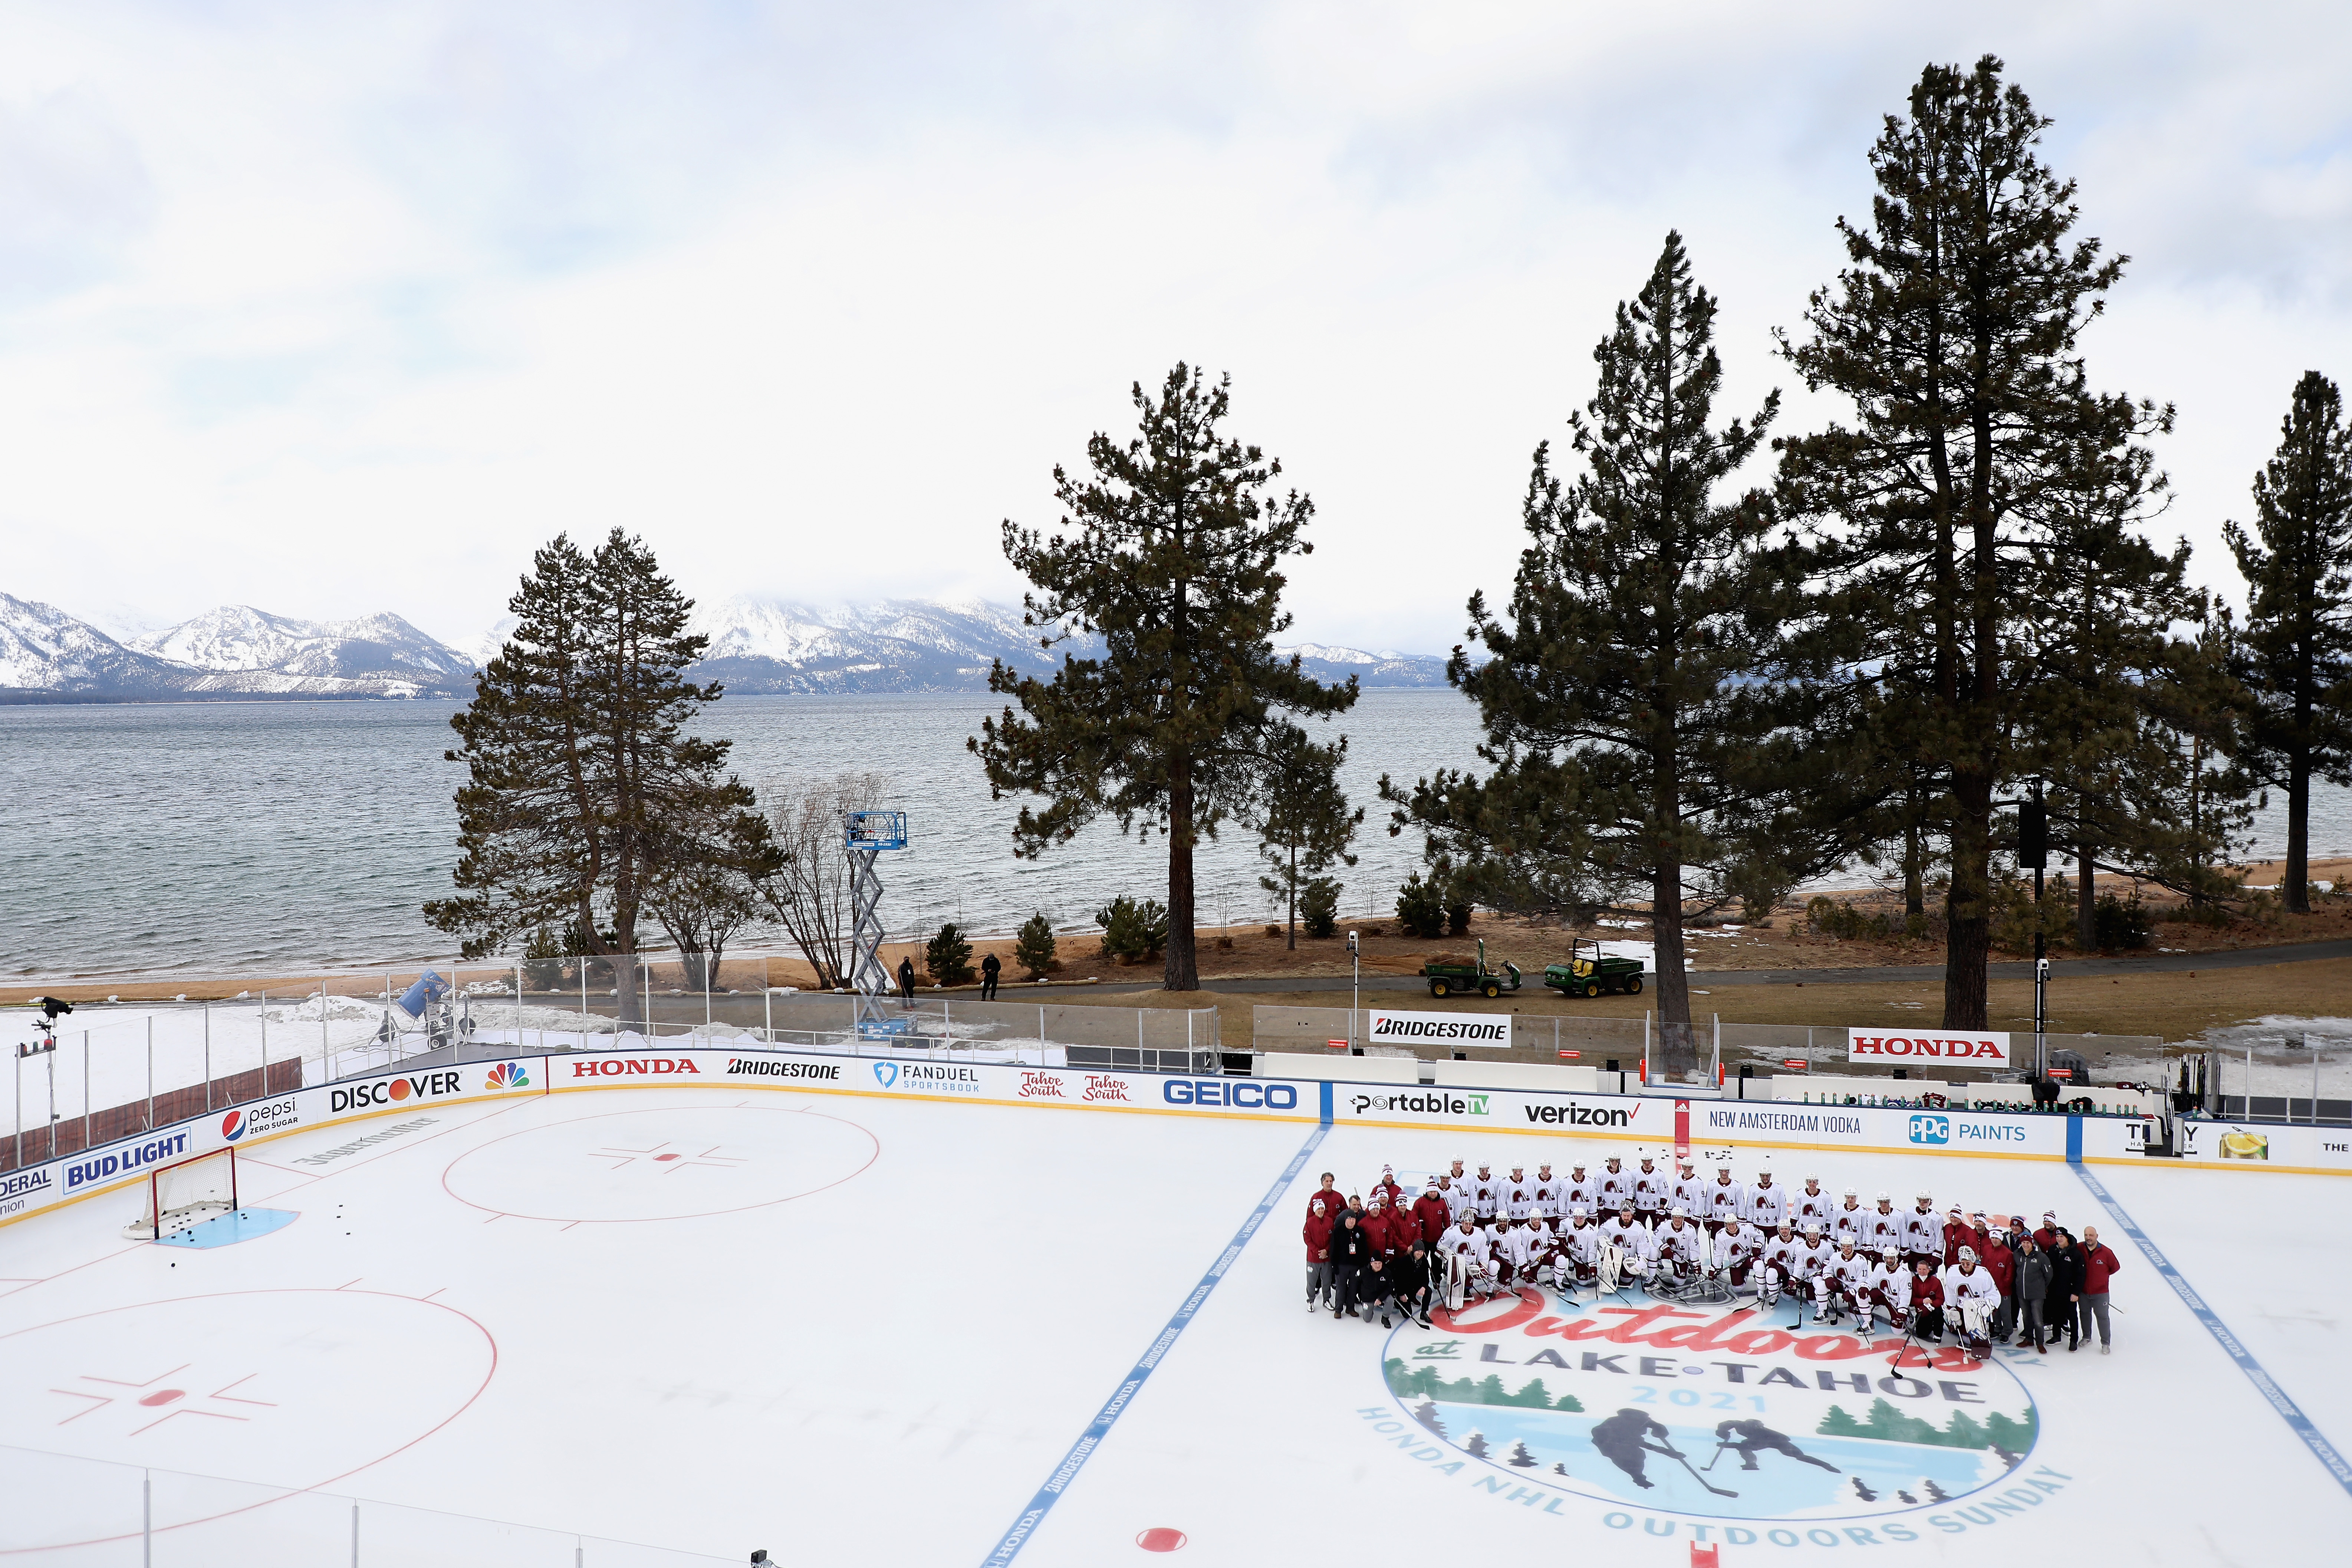 Lake Tahoe could offer TV viewers a different perspective than previous outdoor games